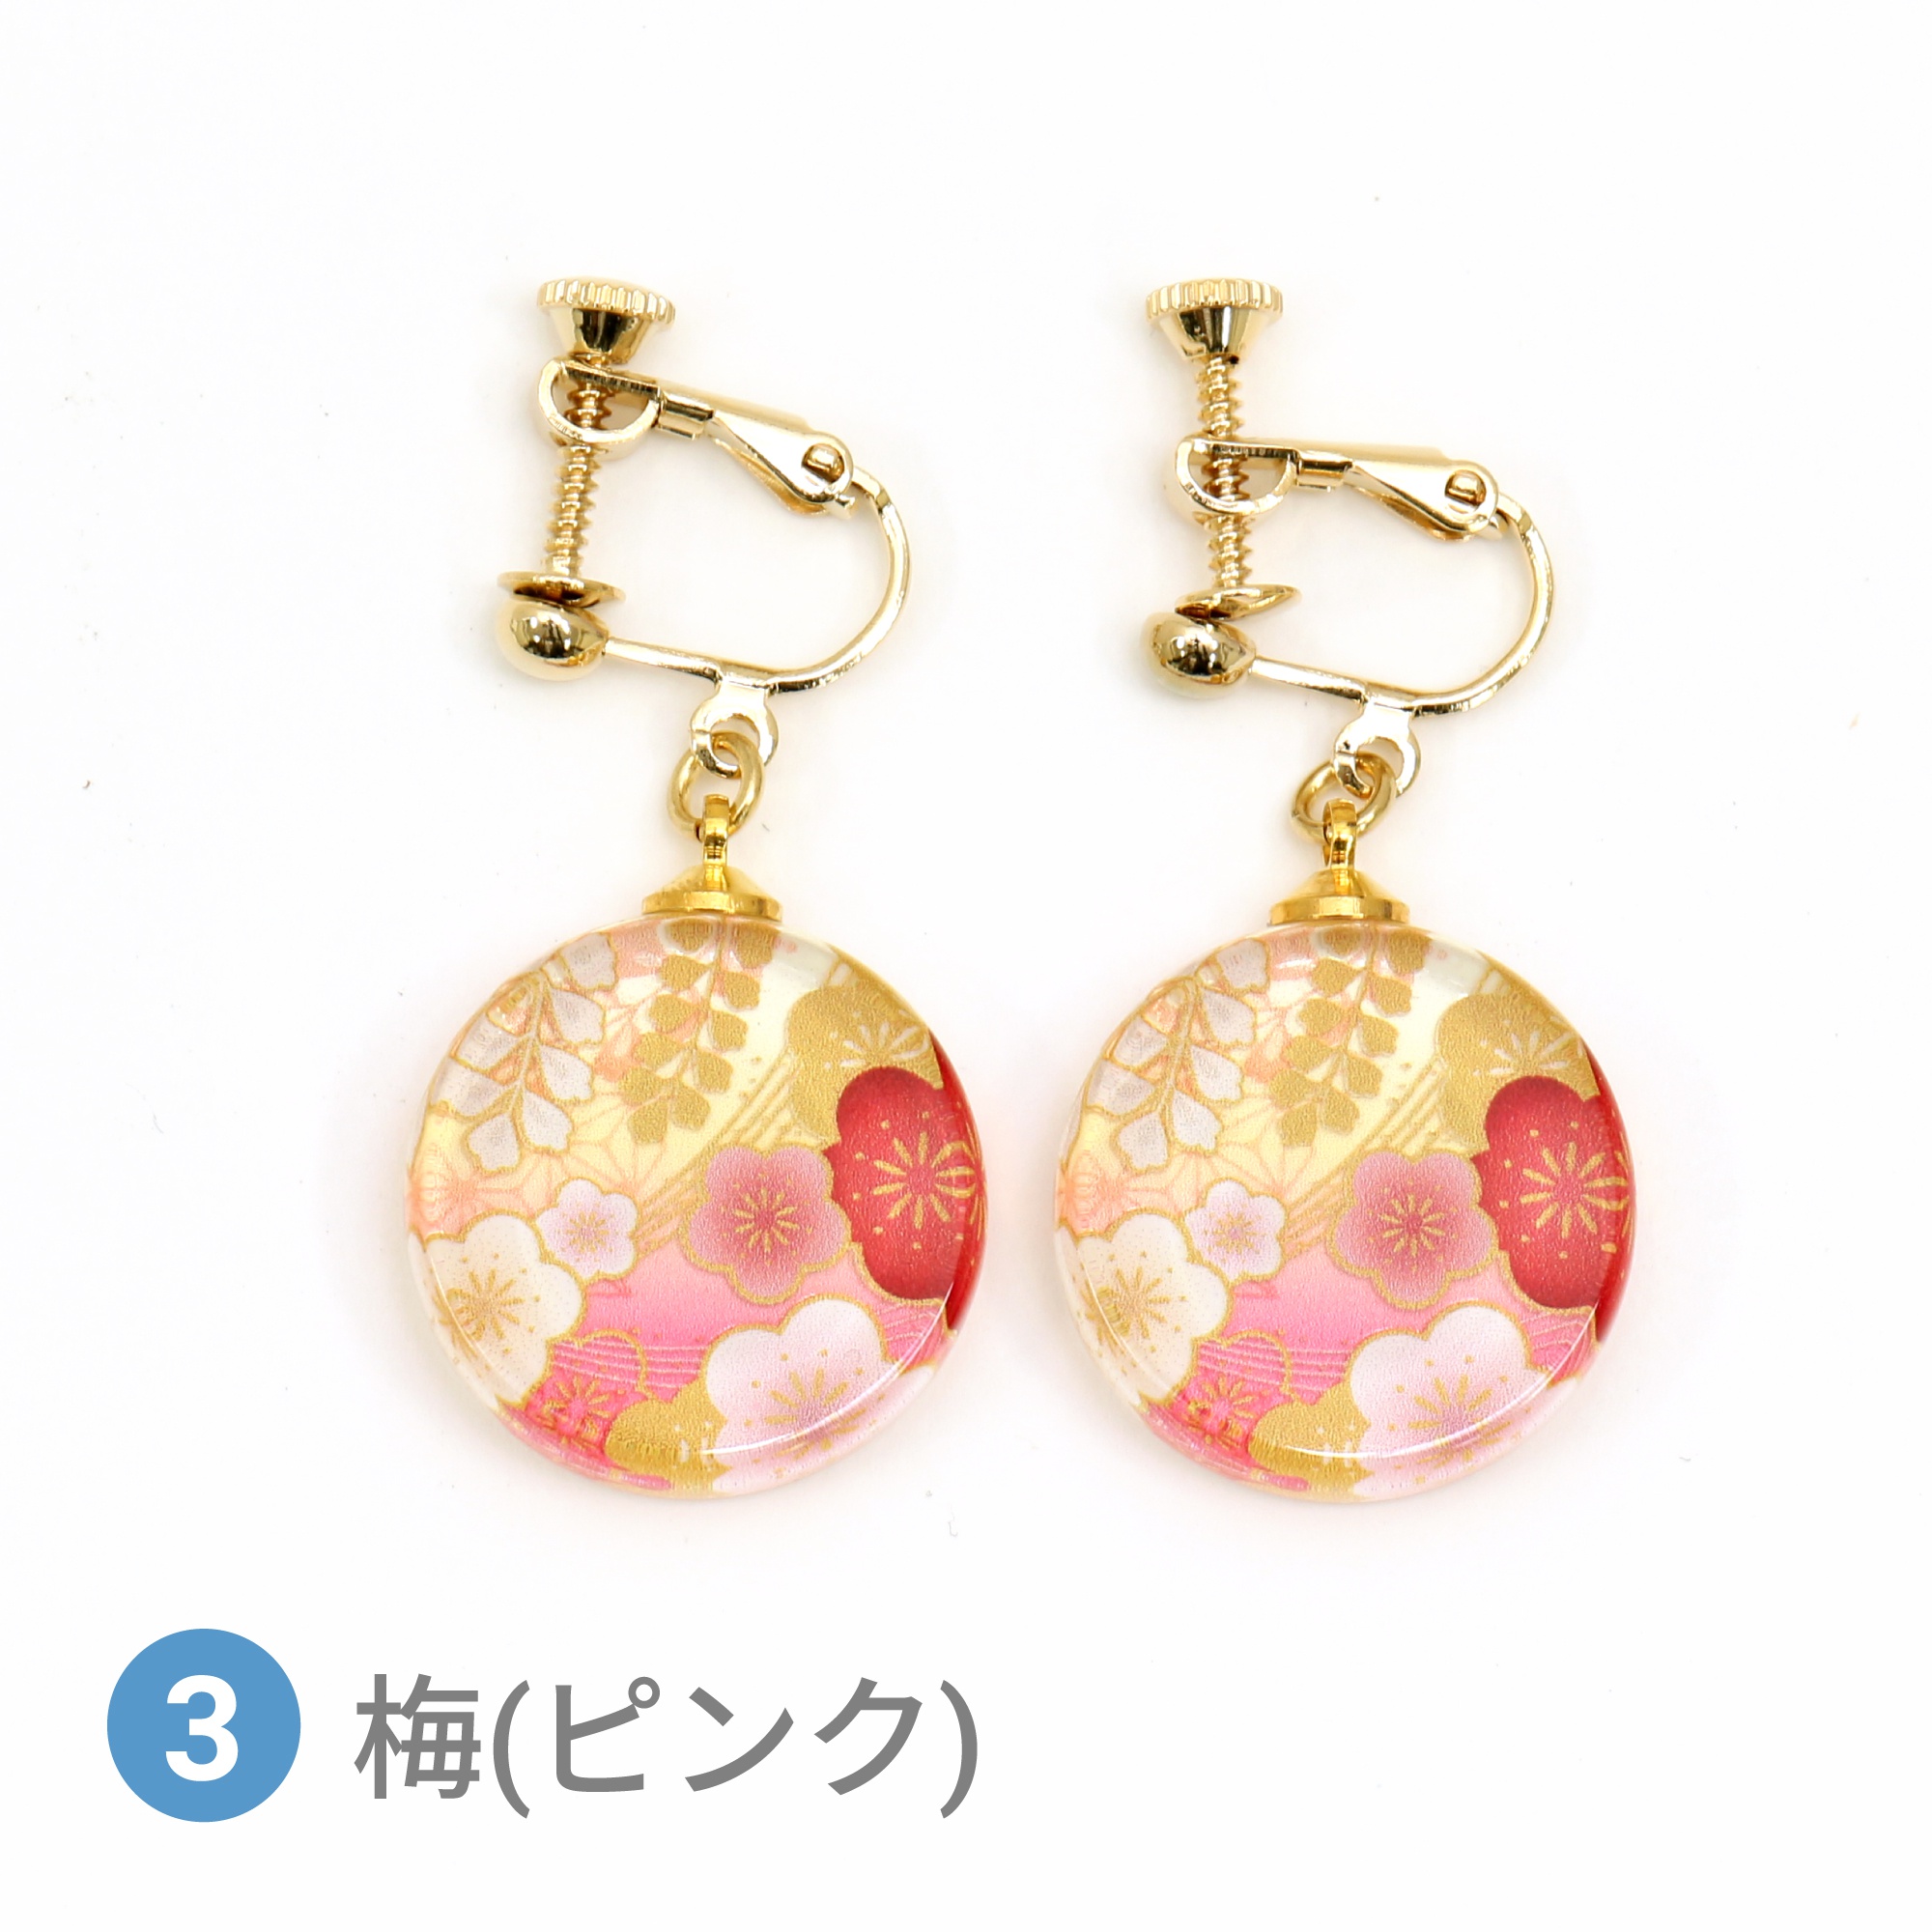 Glass accessories Earring WABANA Japanese apricot pink round shape